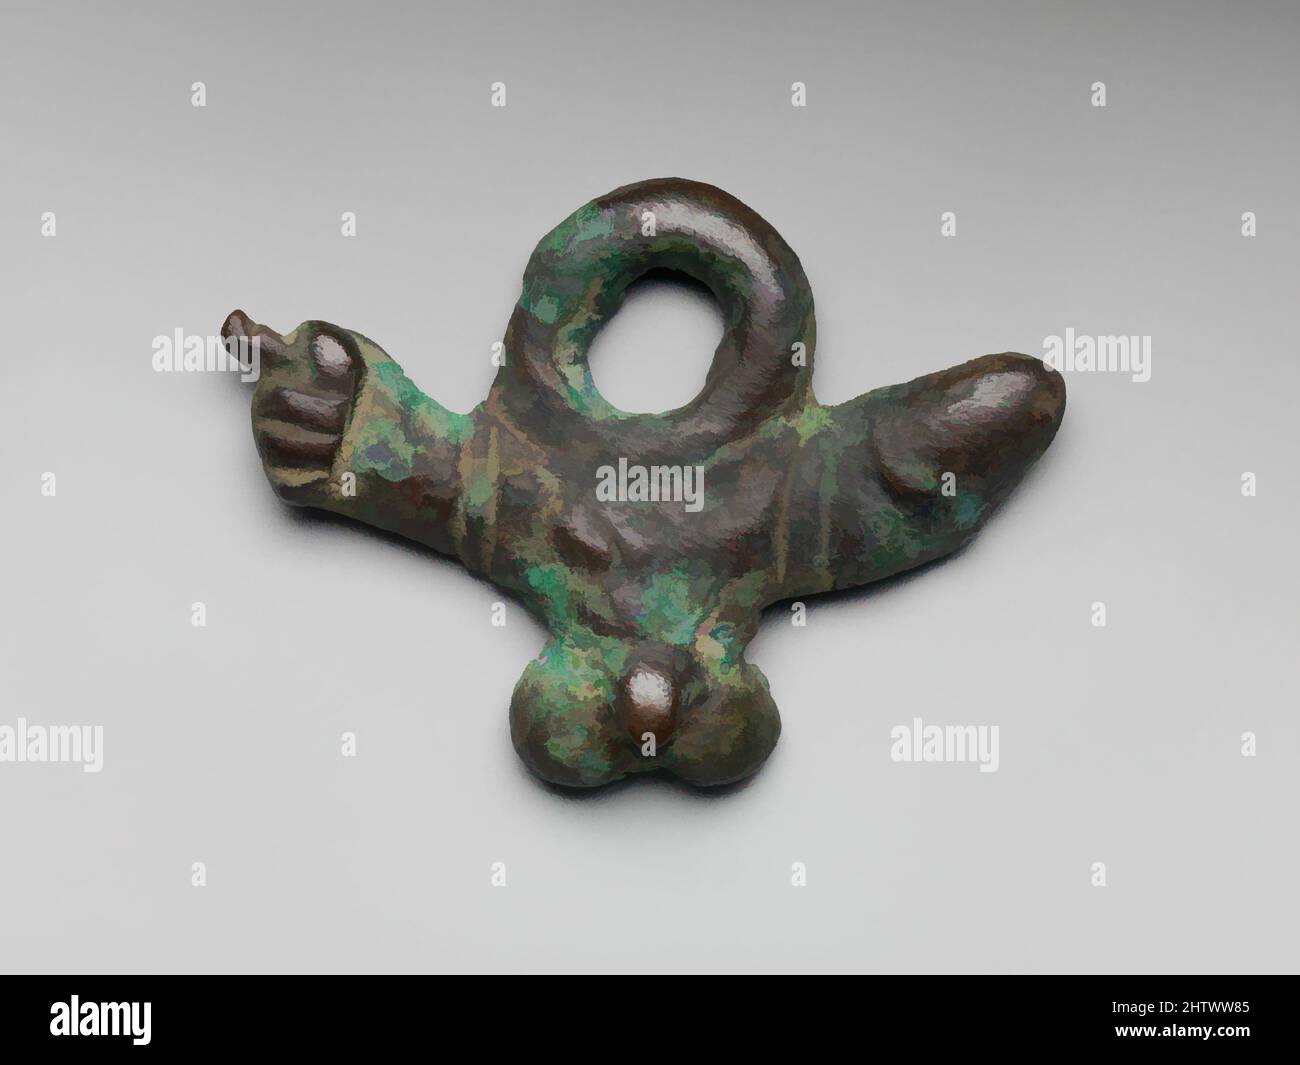 Art inspired by Bronze phallic amulet, Imperial, 1st century A.D., Roman, Bronze, W. 2 7/8 in. (7.3 cm.), Bronzes, This amulet incorporates three different symbols: the phallus, male genitalia, and the mano fica (a rude hand gesture). All three were potent apotropaic devices intended, Classic works modernized by Artotop with a splash of modernity. Shapes, color and value, eye-catching visual impact on art. Emotions through freedom of artworks in a contemporary way. A timeless message pursuing a wildly creative new direction. Artists turning to the digital medium and creating the Artotop NFT Stock Photo